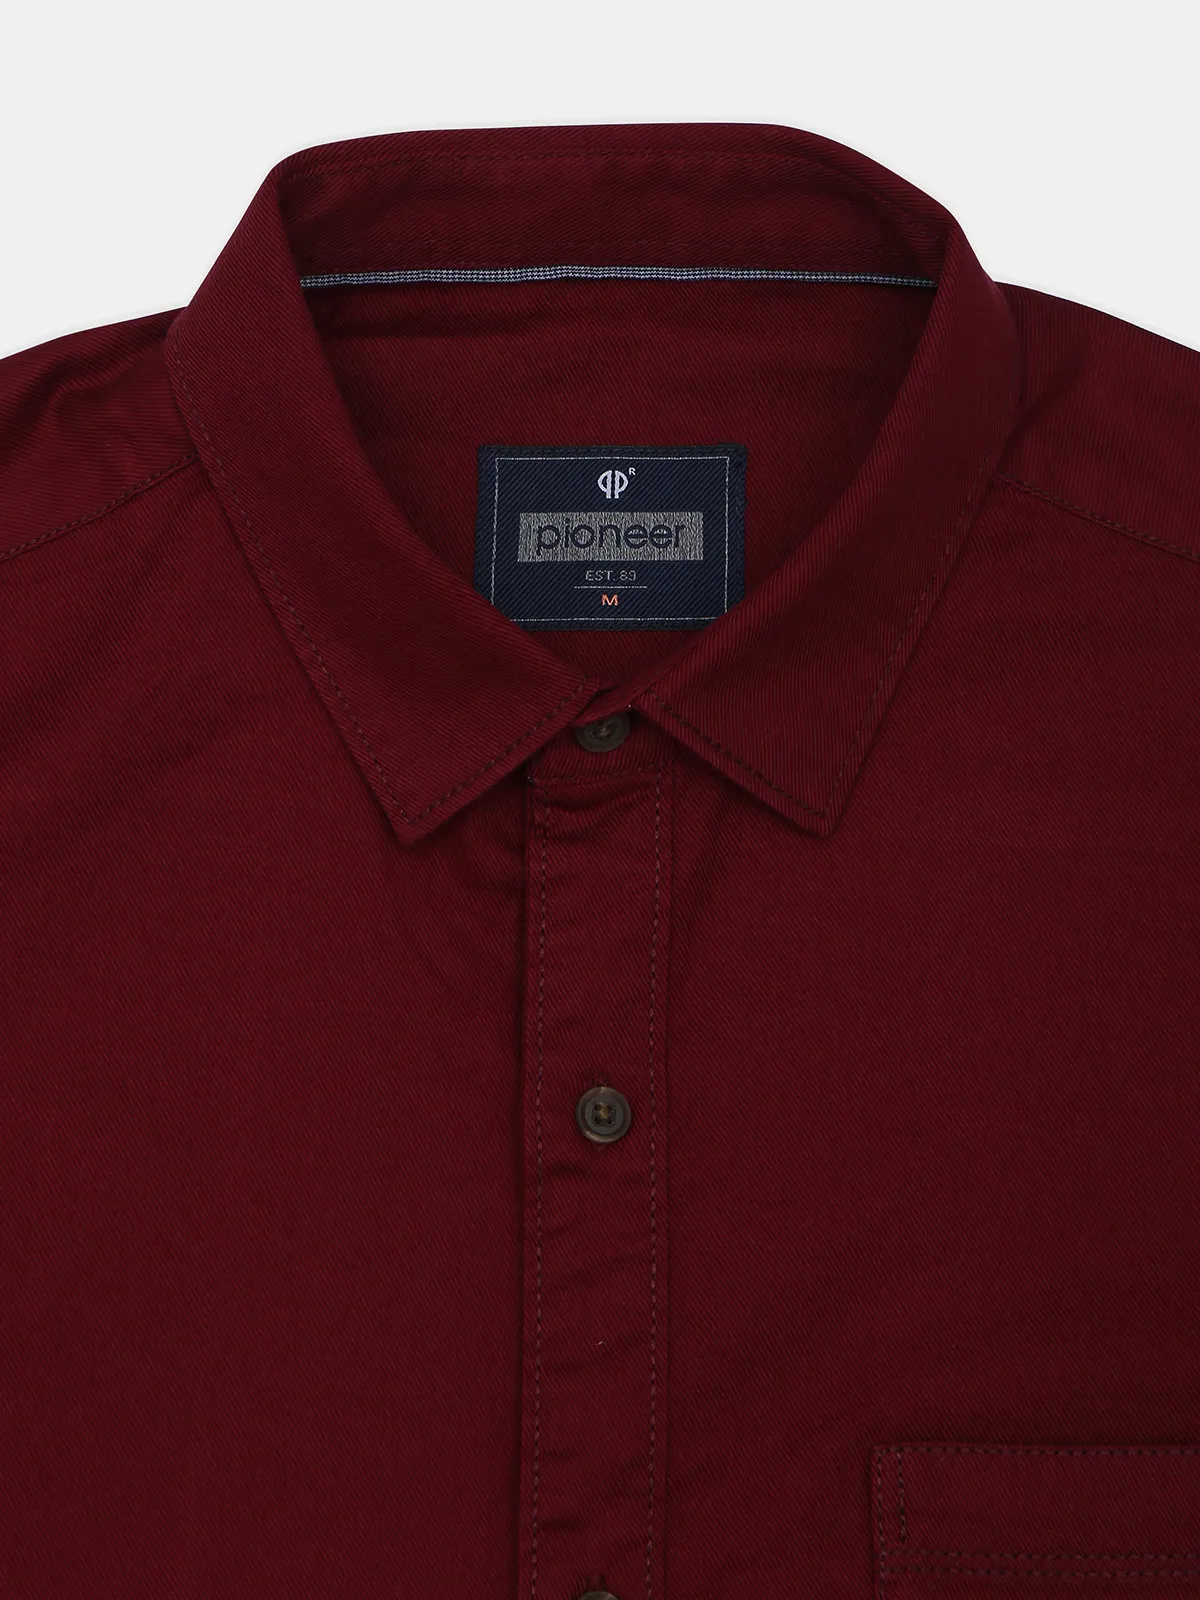 Pioneer maroon plain cotton shirt for casual